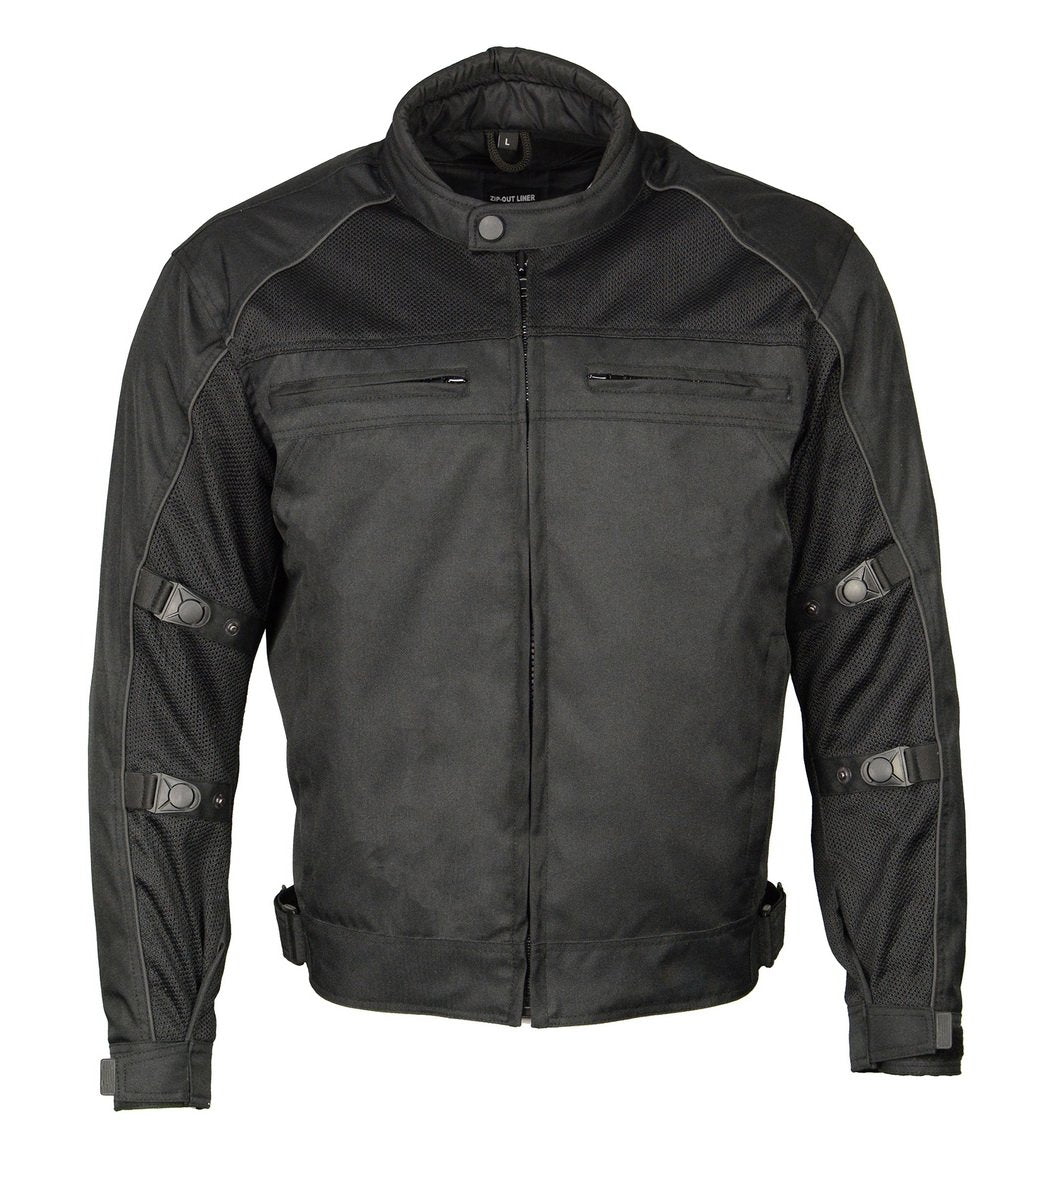 M Boss Motorcycle Apparel BOS11703 Black Men's Black Nylon and Mesh Racer Jacket with Reflective Piping